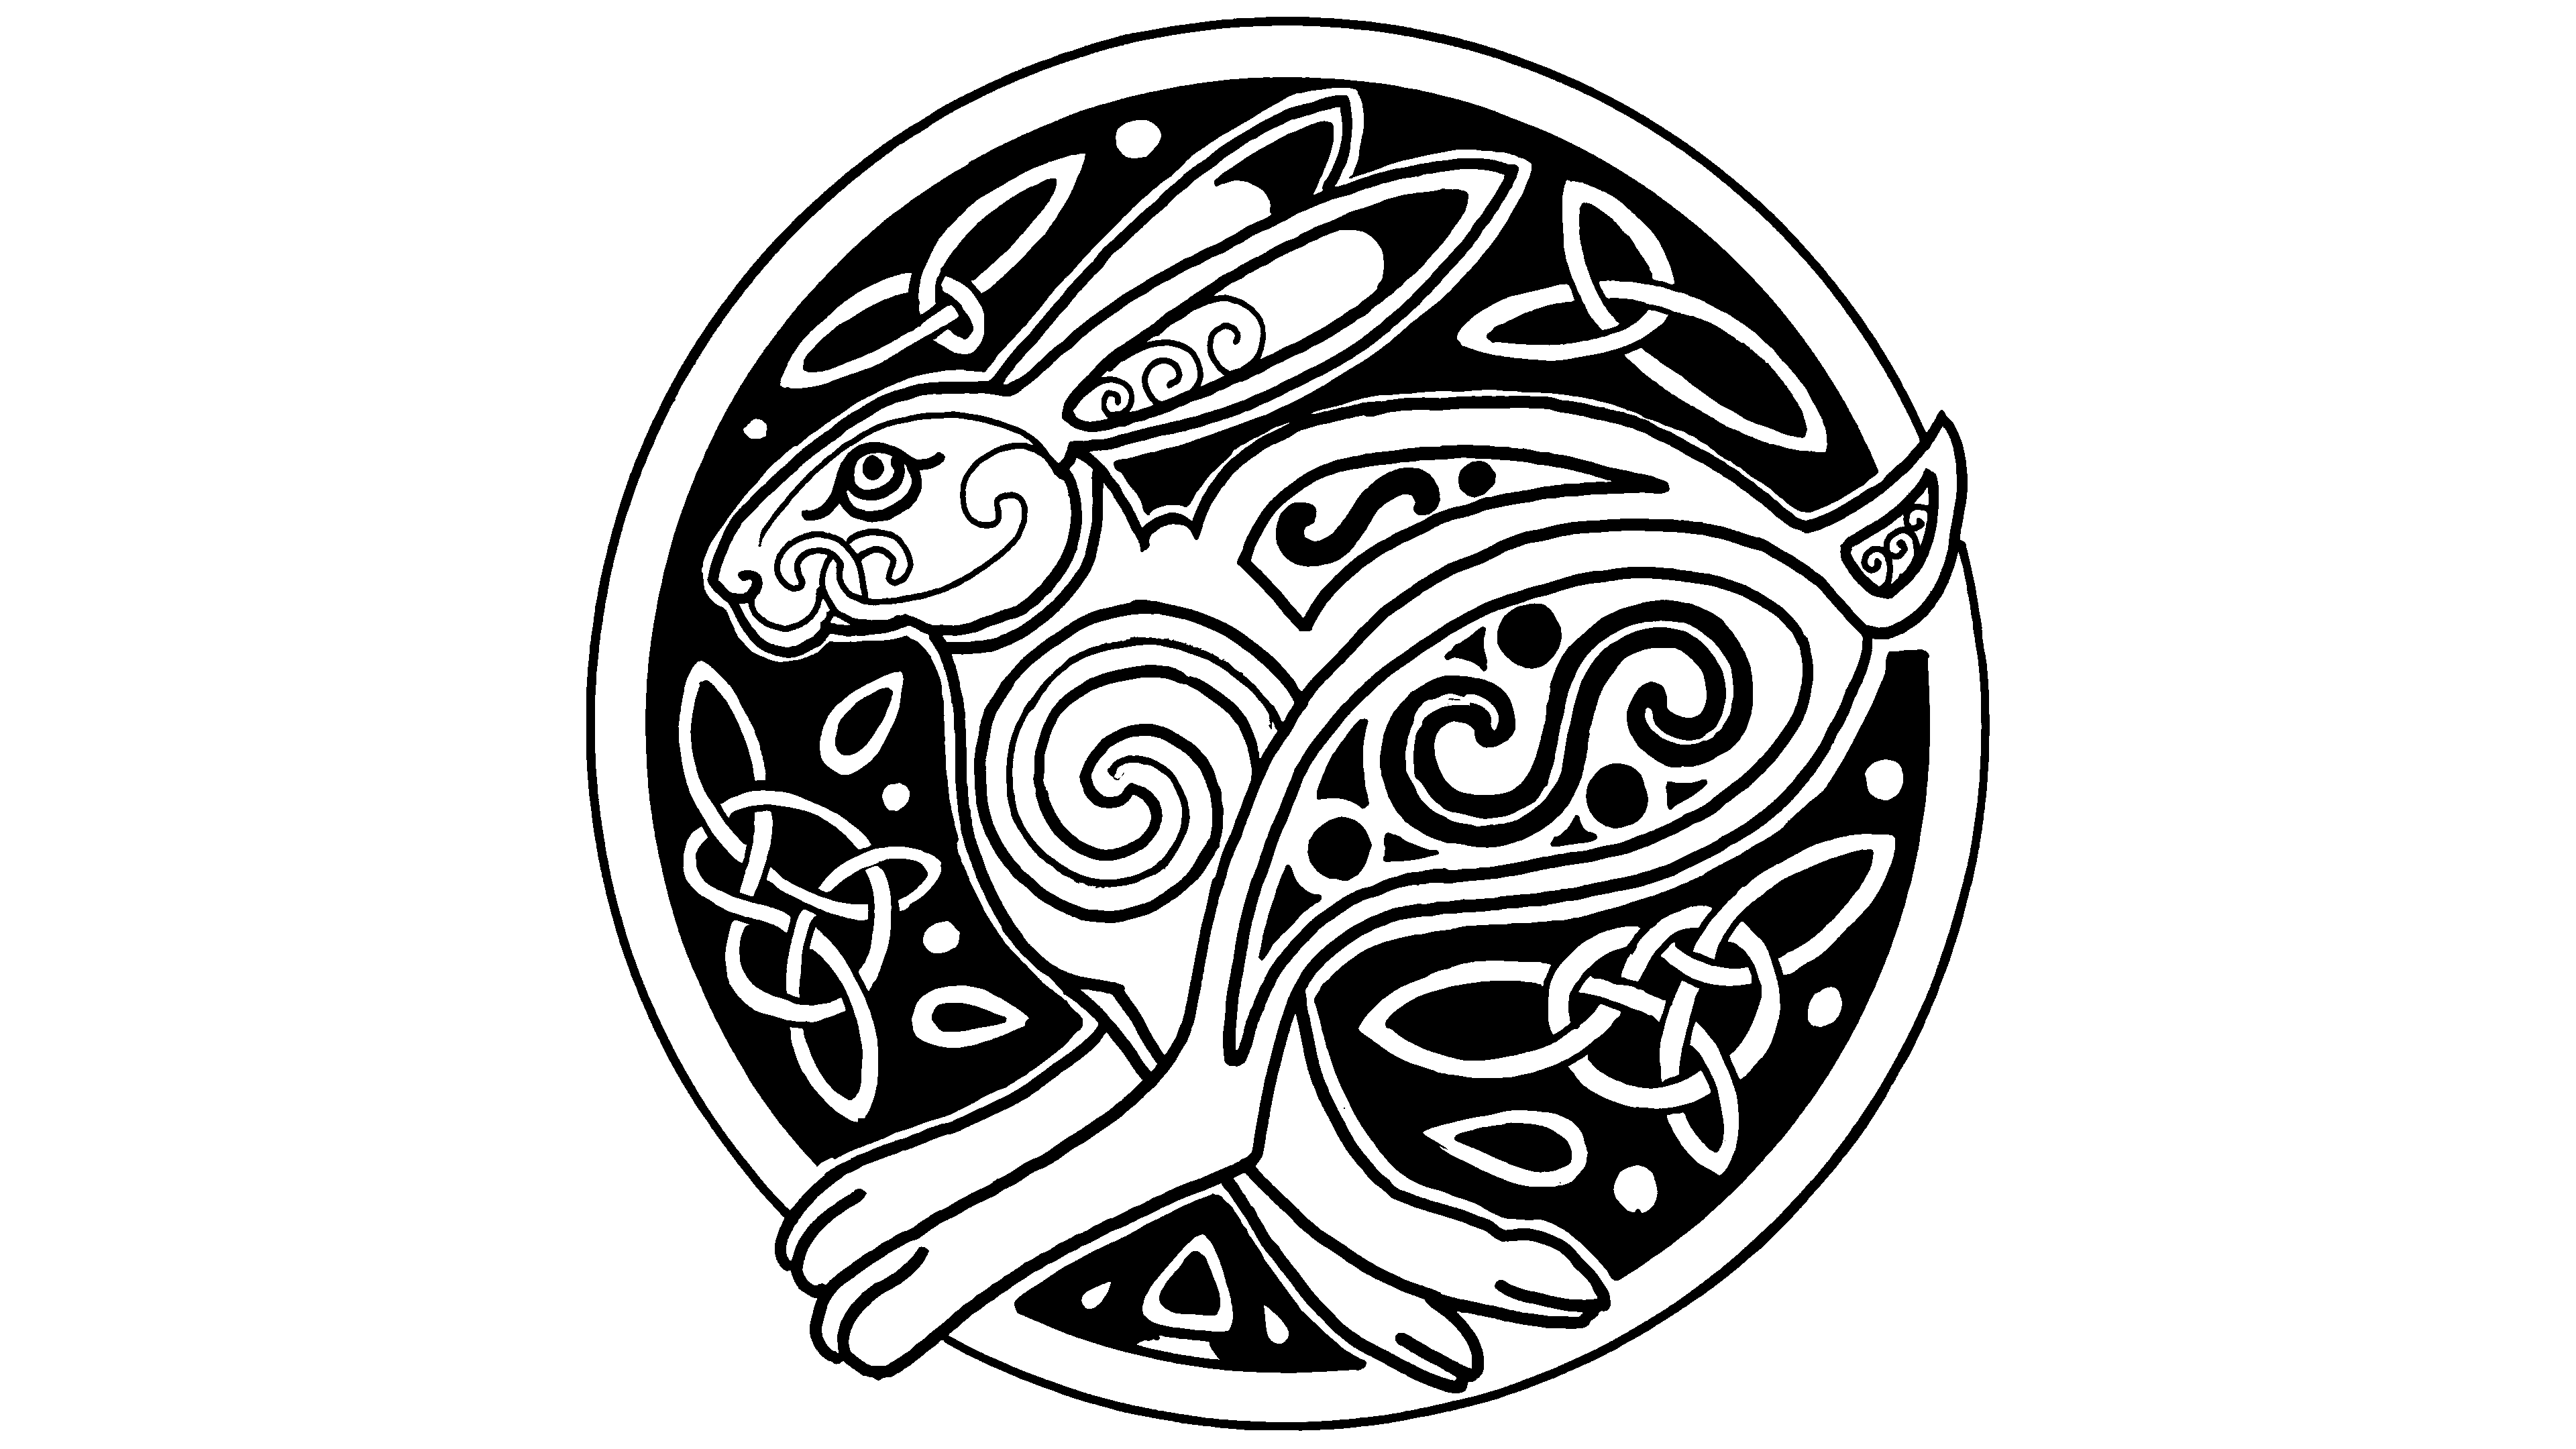 celtic symbols and their meanings chart